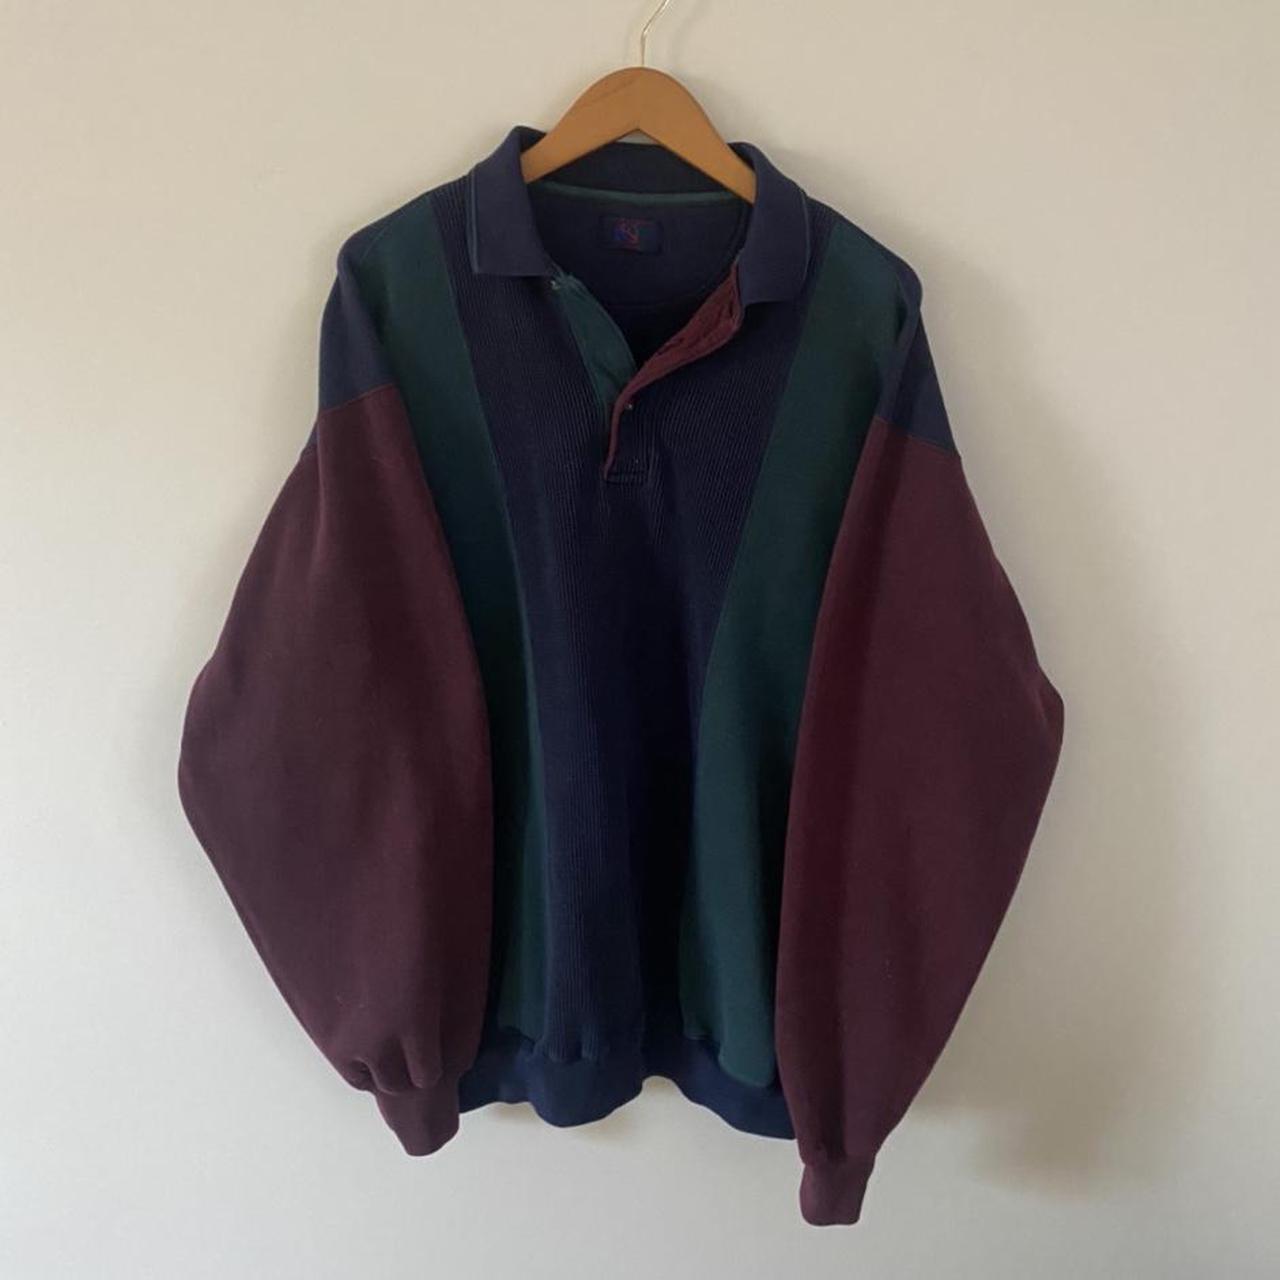 Product Image 1 - Vintage multicolored sweatshirt rugby top
No